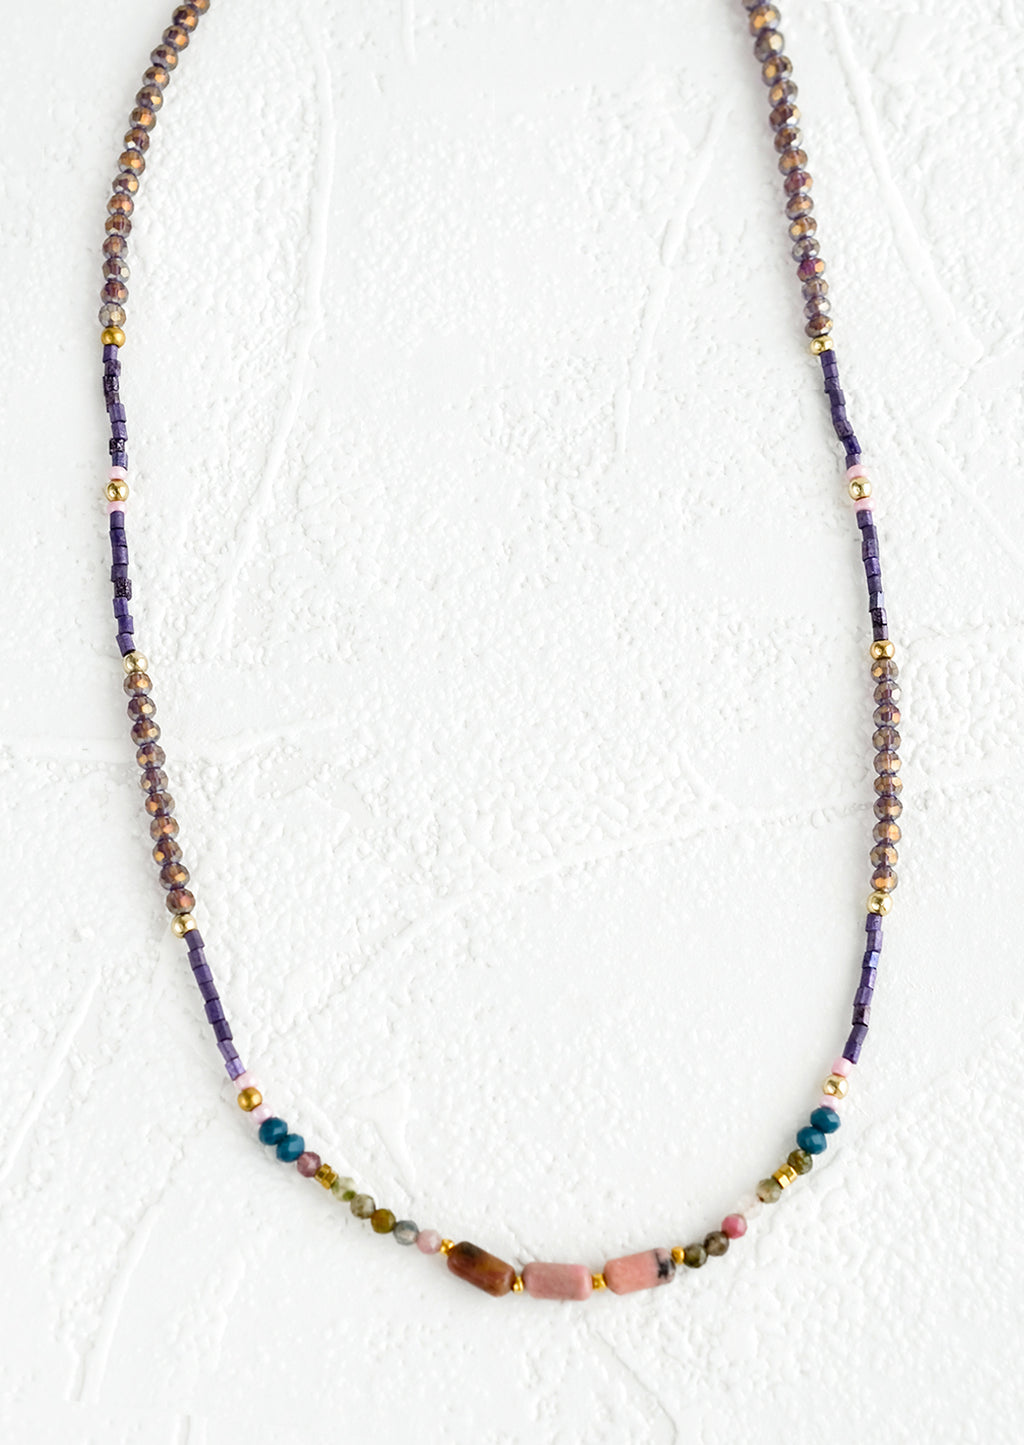 1: Beaded necklace with varied glass and gemstone beads.